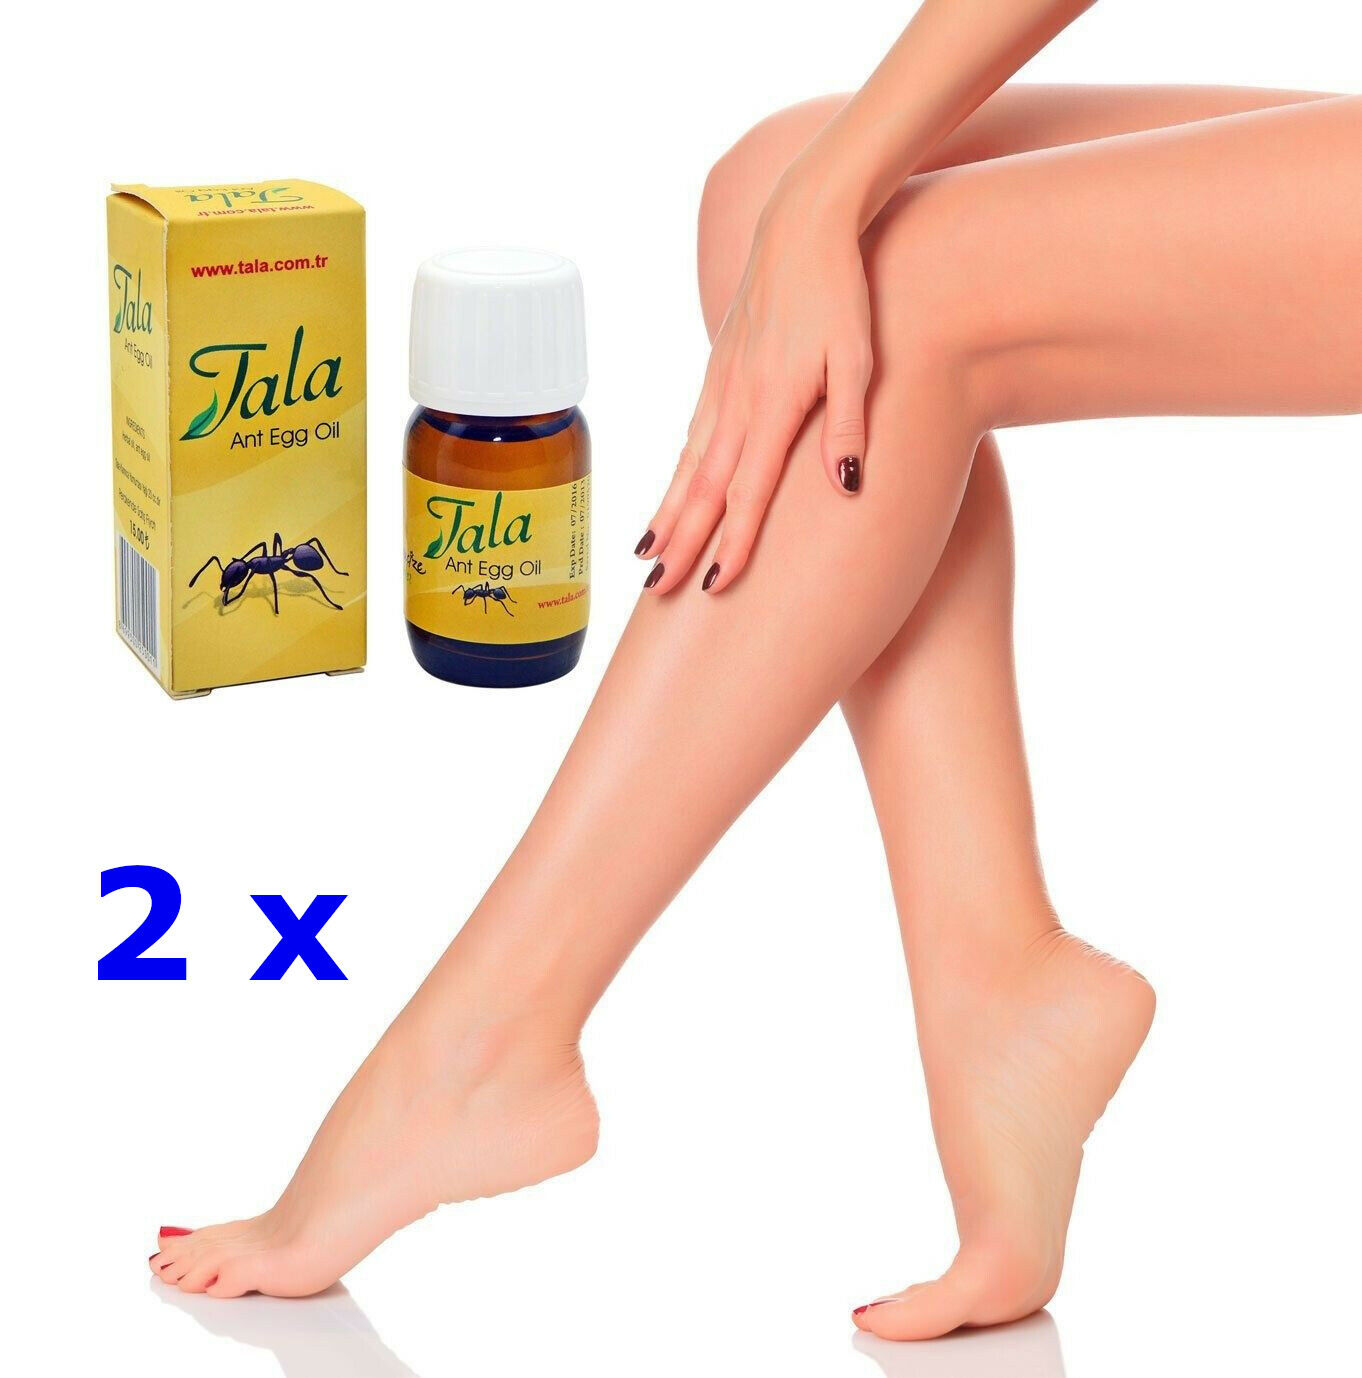 2 X Tala Ant Egg Oil Permanent Hair Removal Reducing Original 20ml Free Shipping